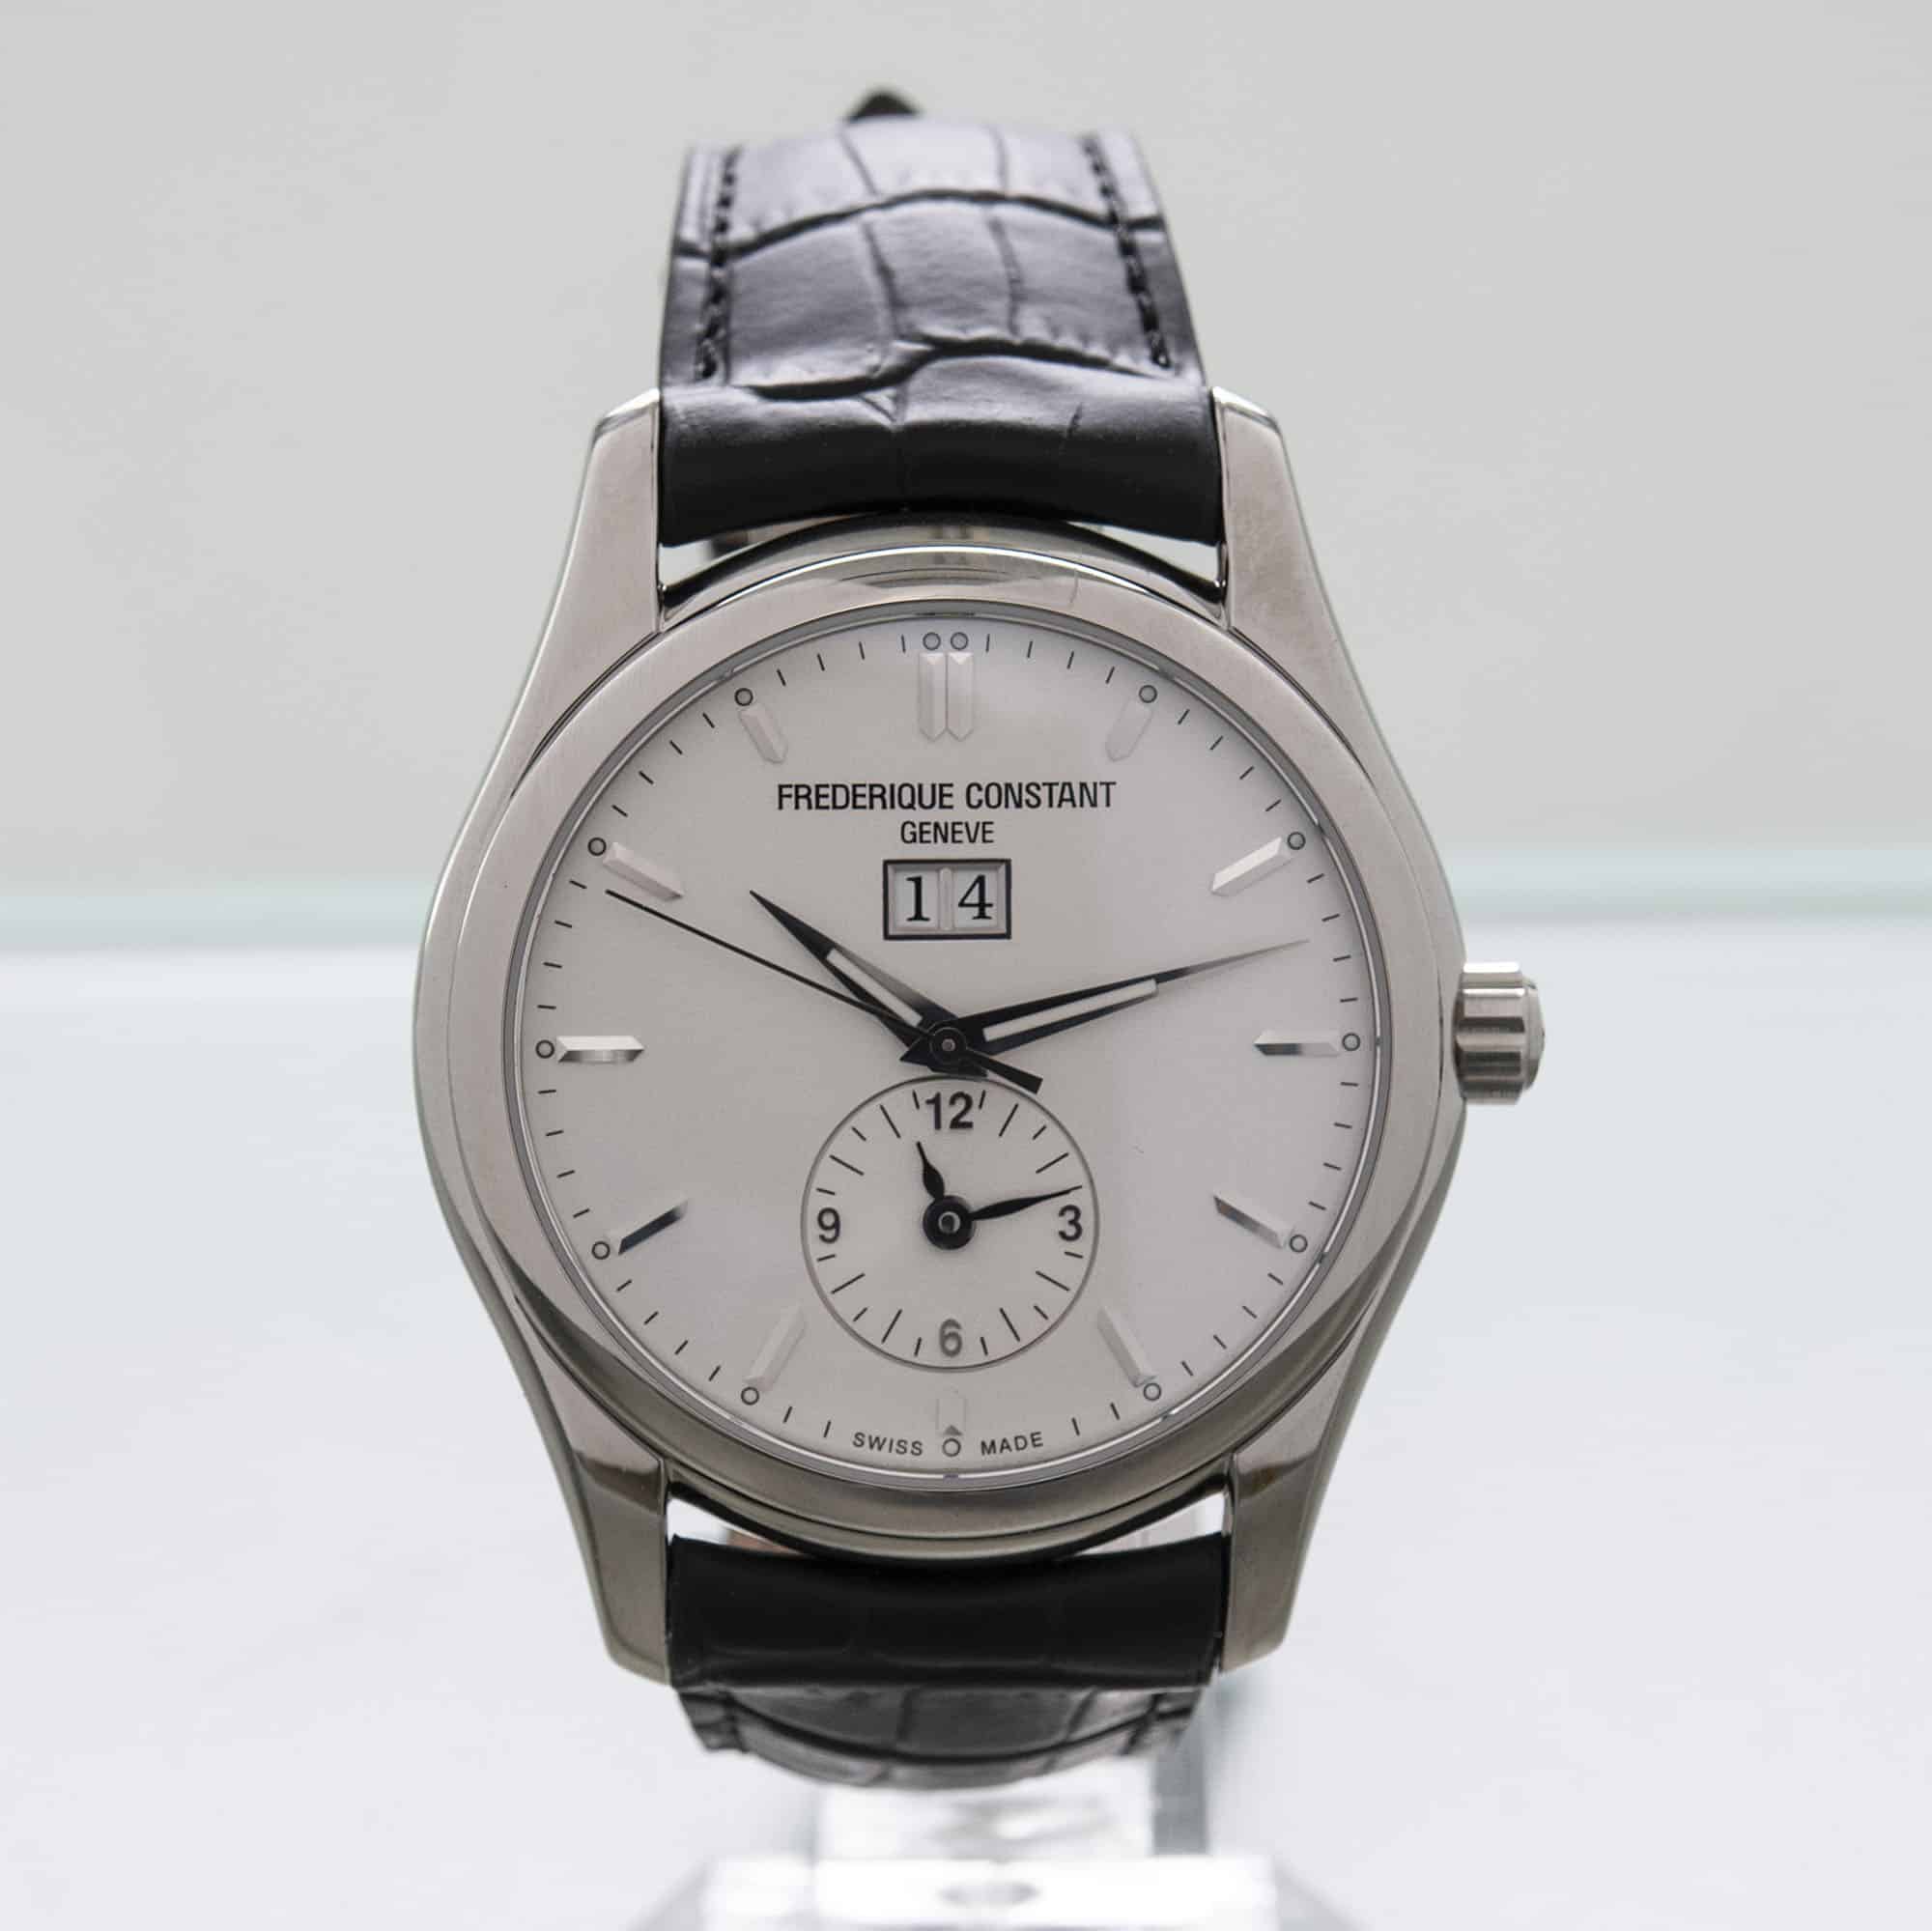 Frederique Constant Clear Vision Big Date Dual Time Automatic Watch FC-325S6B6